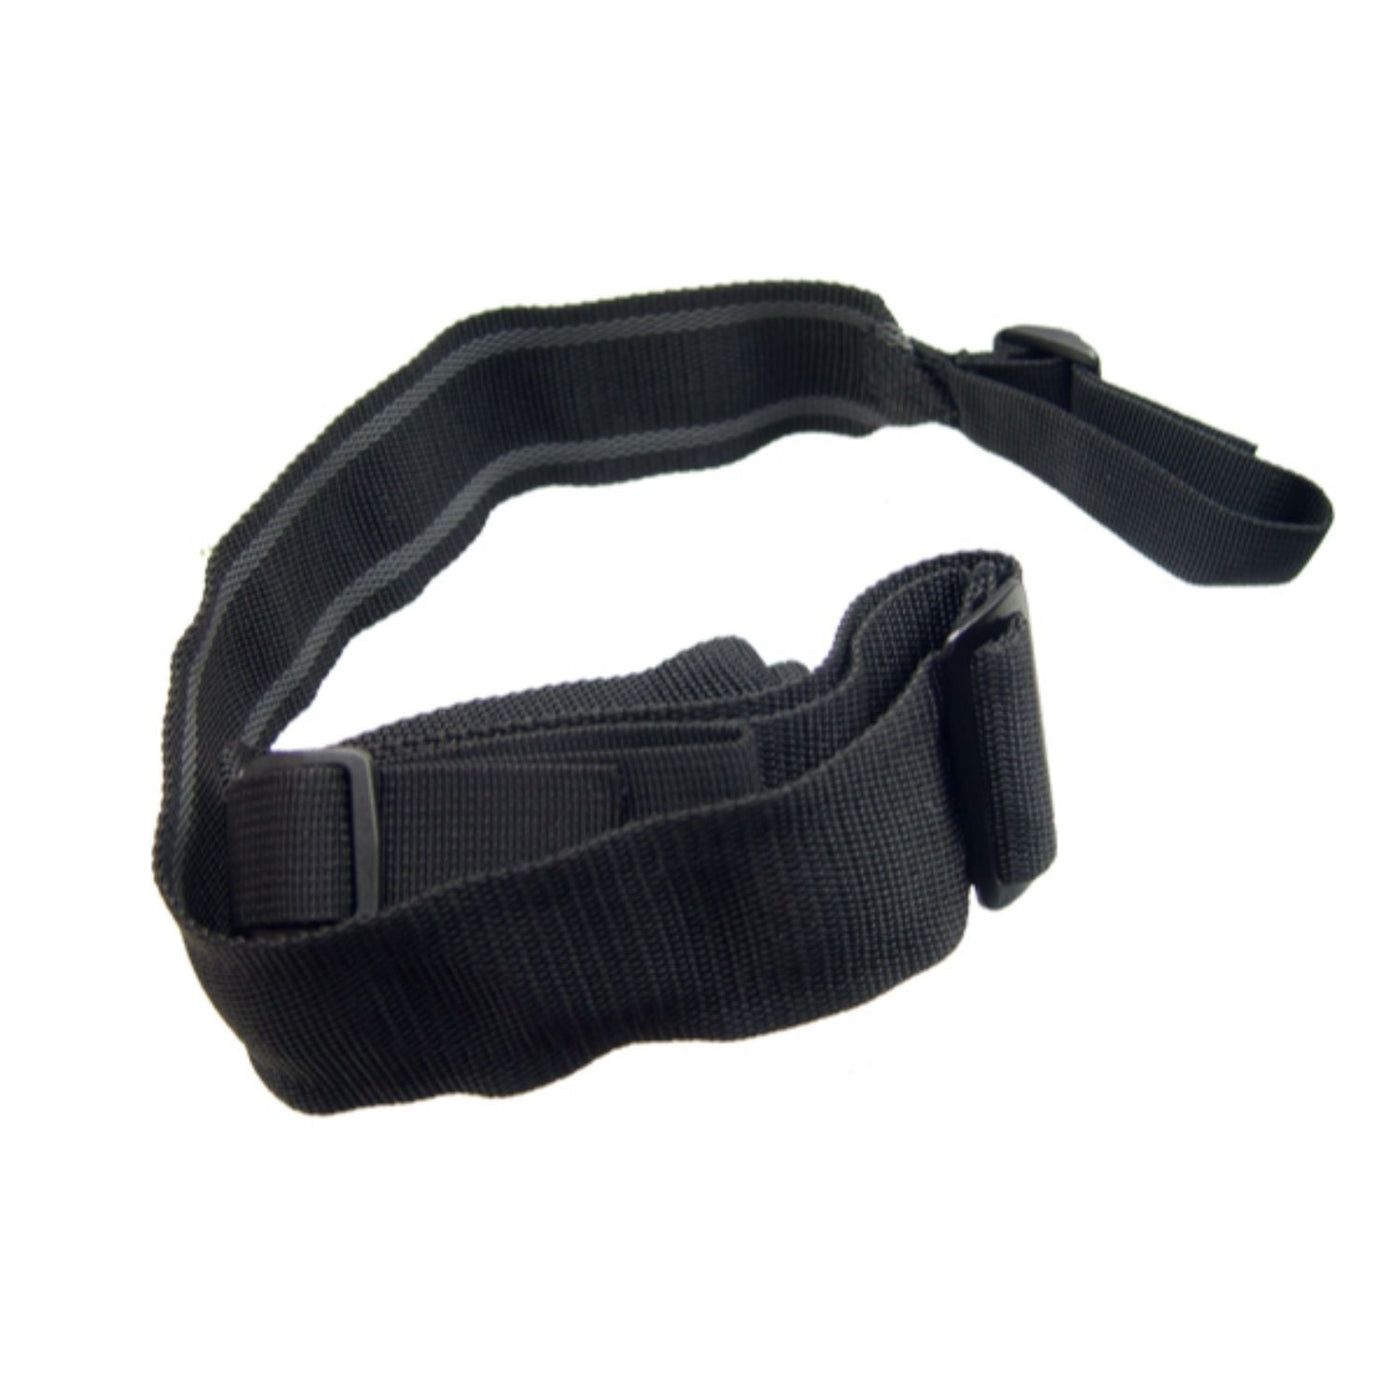 Leapers Leapers UTG Two Point Universal Rifle Sling-Black Shooting